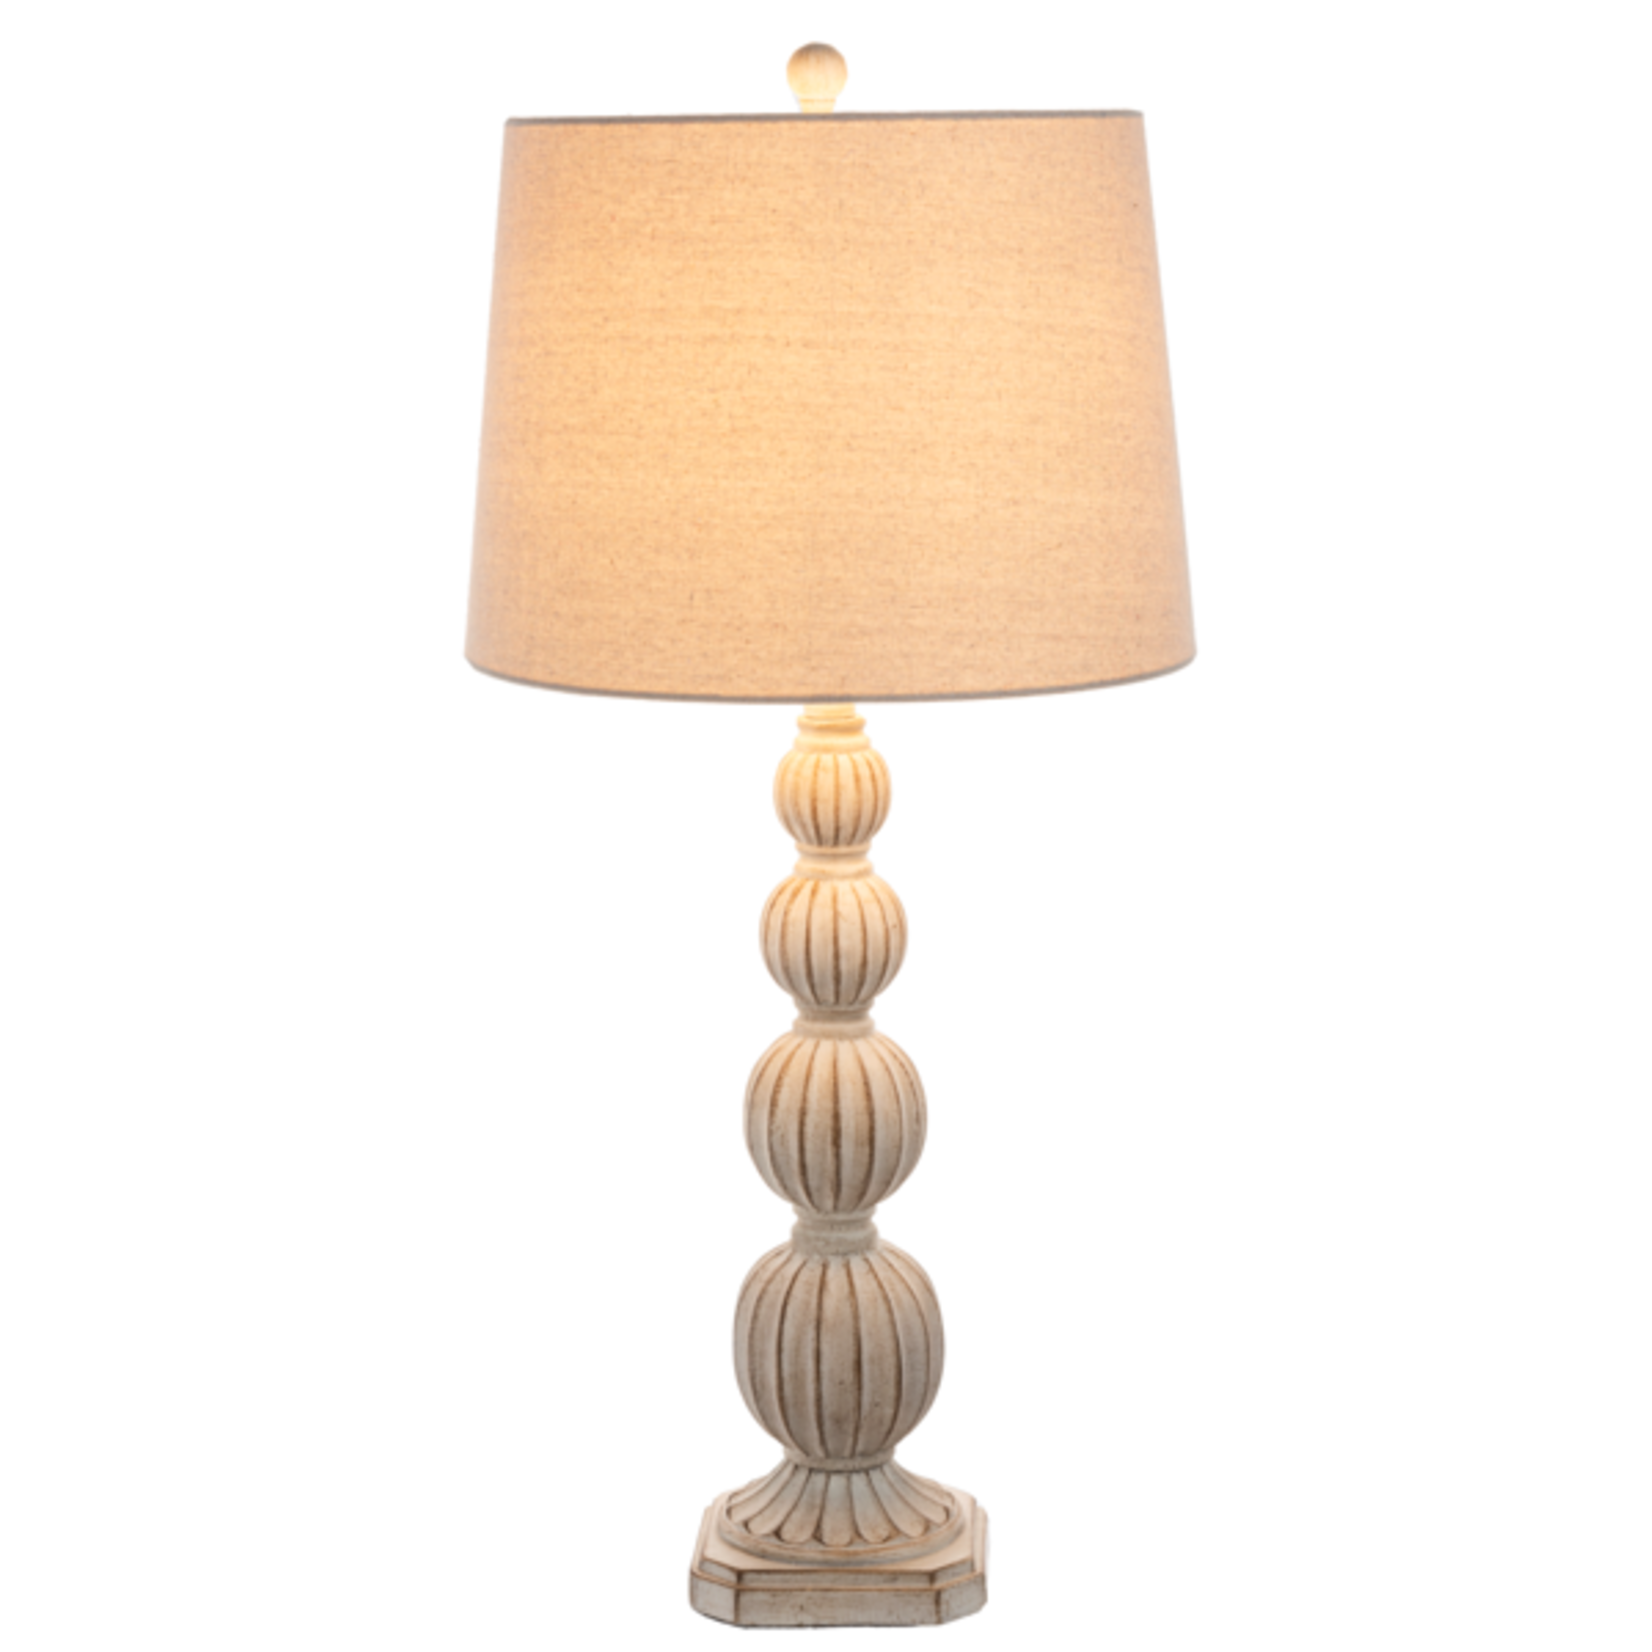 Distressed Ivory Finial Table Lamp